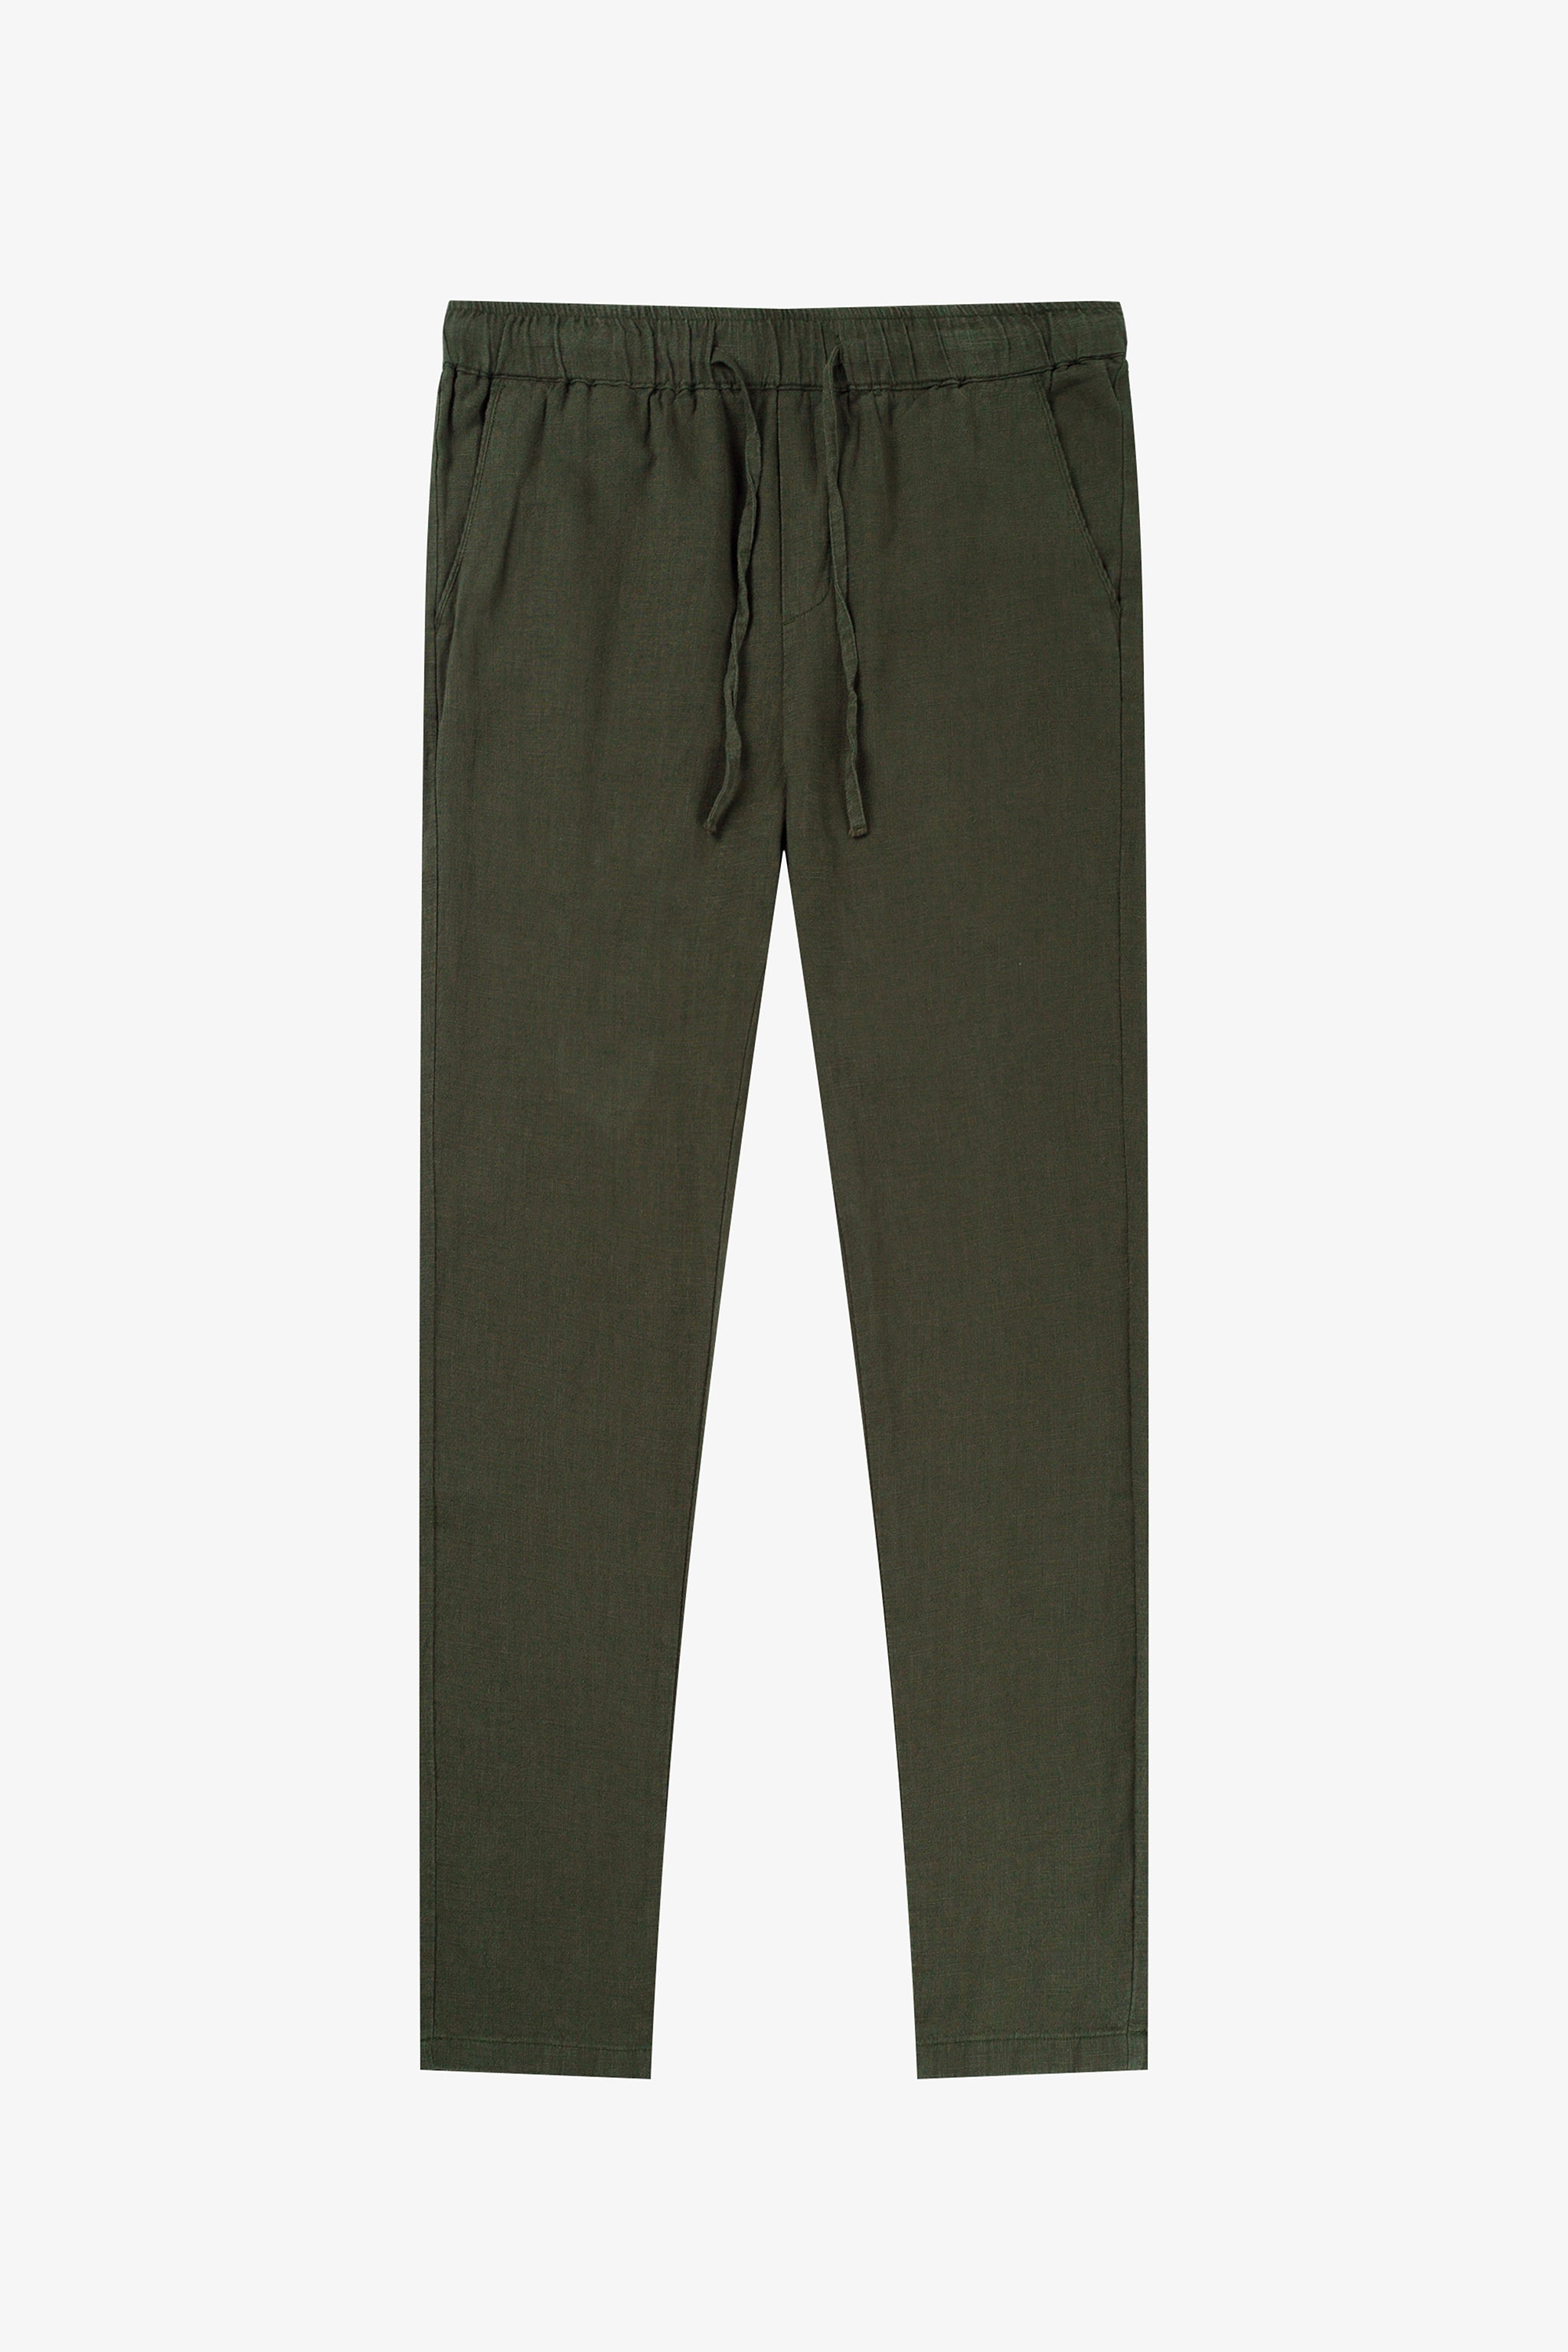 a picture of a pair of green pants